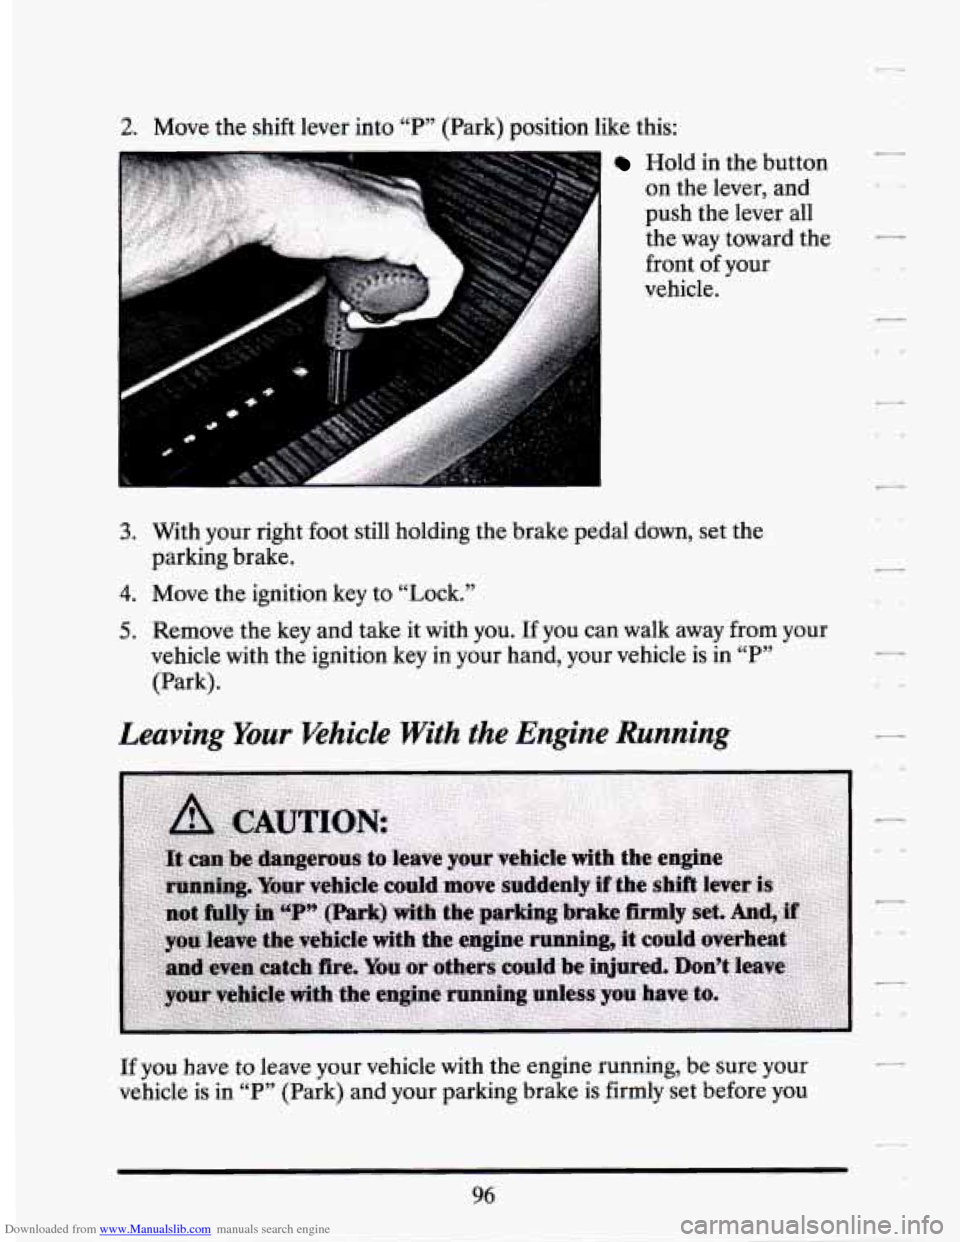 CADILLAC SEVILLE 1994 4.G Owners Manual Downloaded from www.Manualslib.com manuals search engine 2. Move the shift  lever  into “P’, (Park)  position  like  this: 
1 Hold in the  button 
on  the  lever, and 
push  the lever  all 
the  w